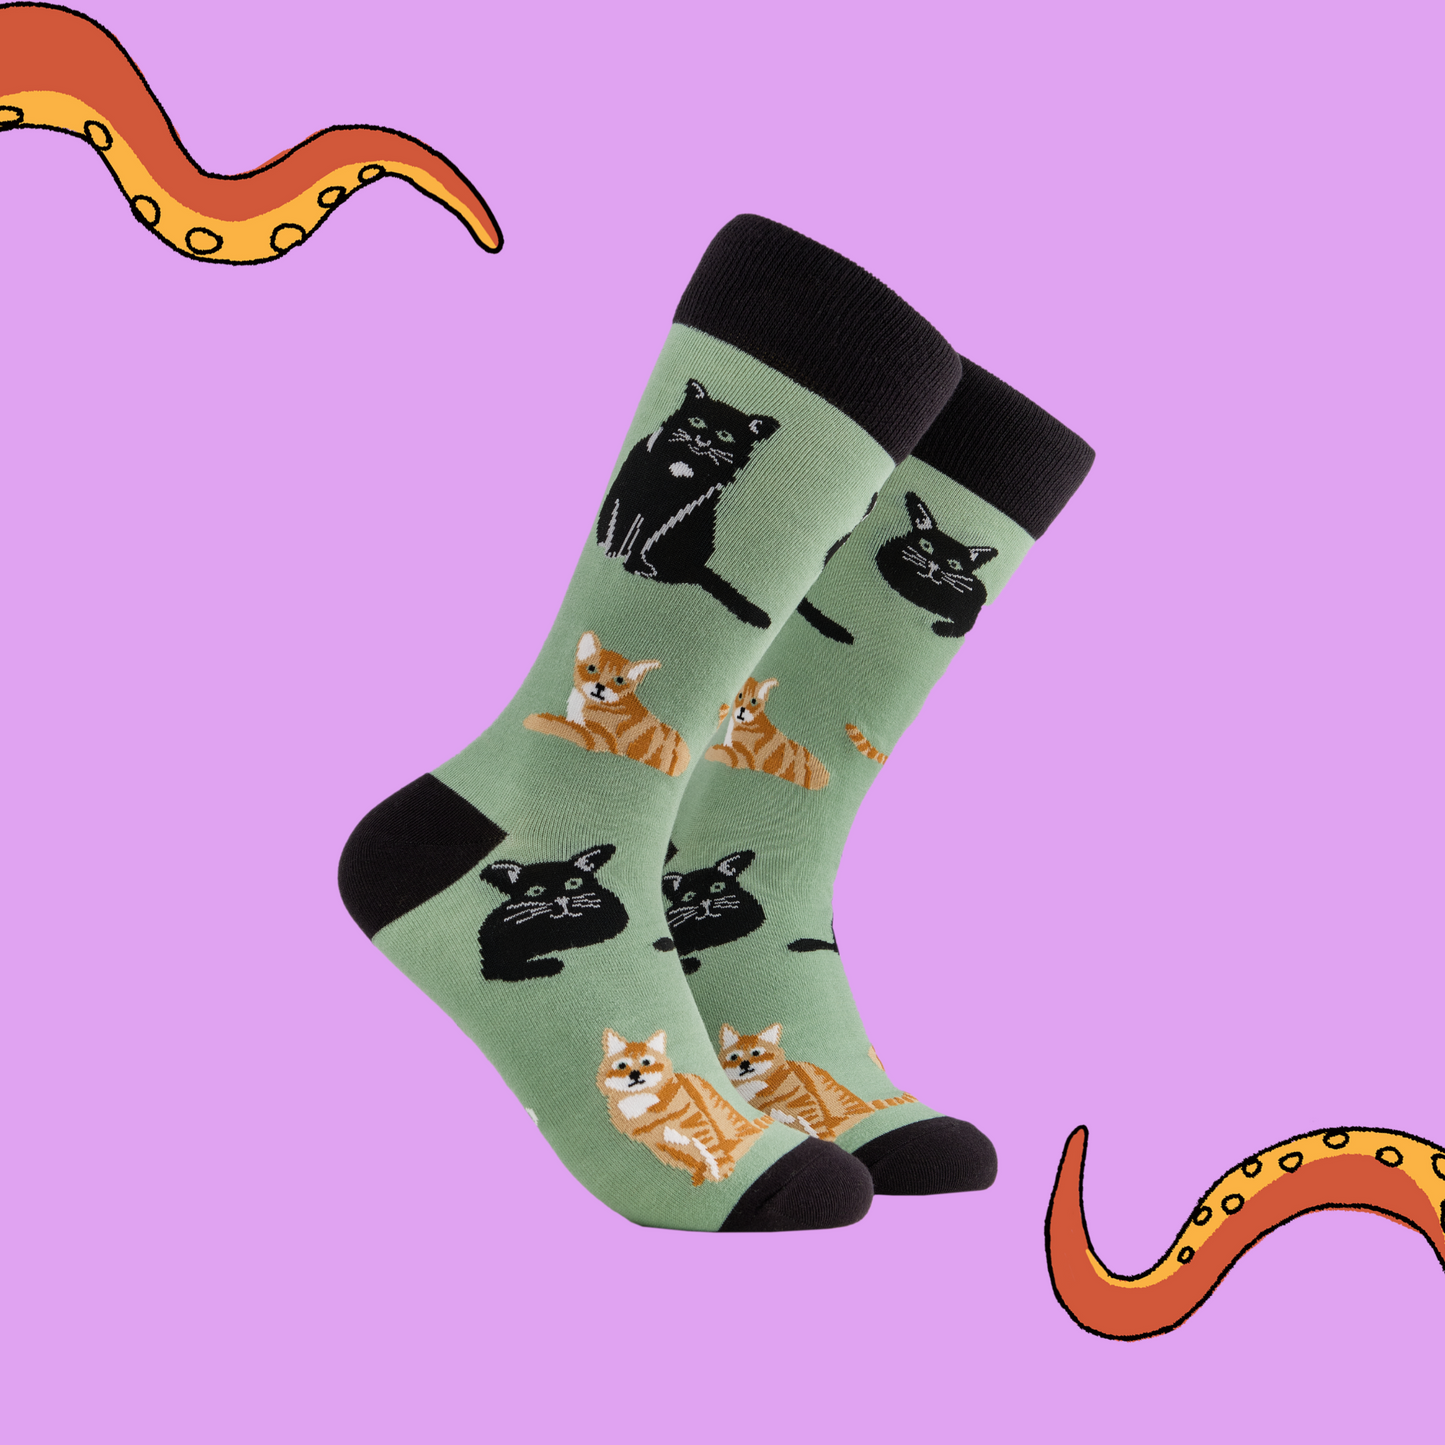 A pair of socks depicting cats. Green legs, black cuff, heel and toe.